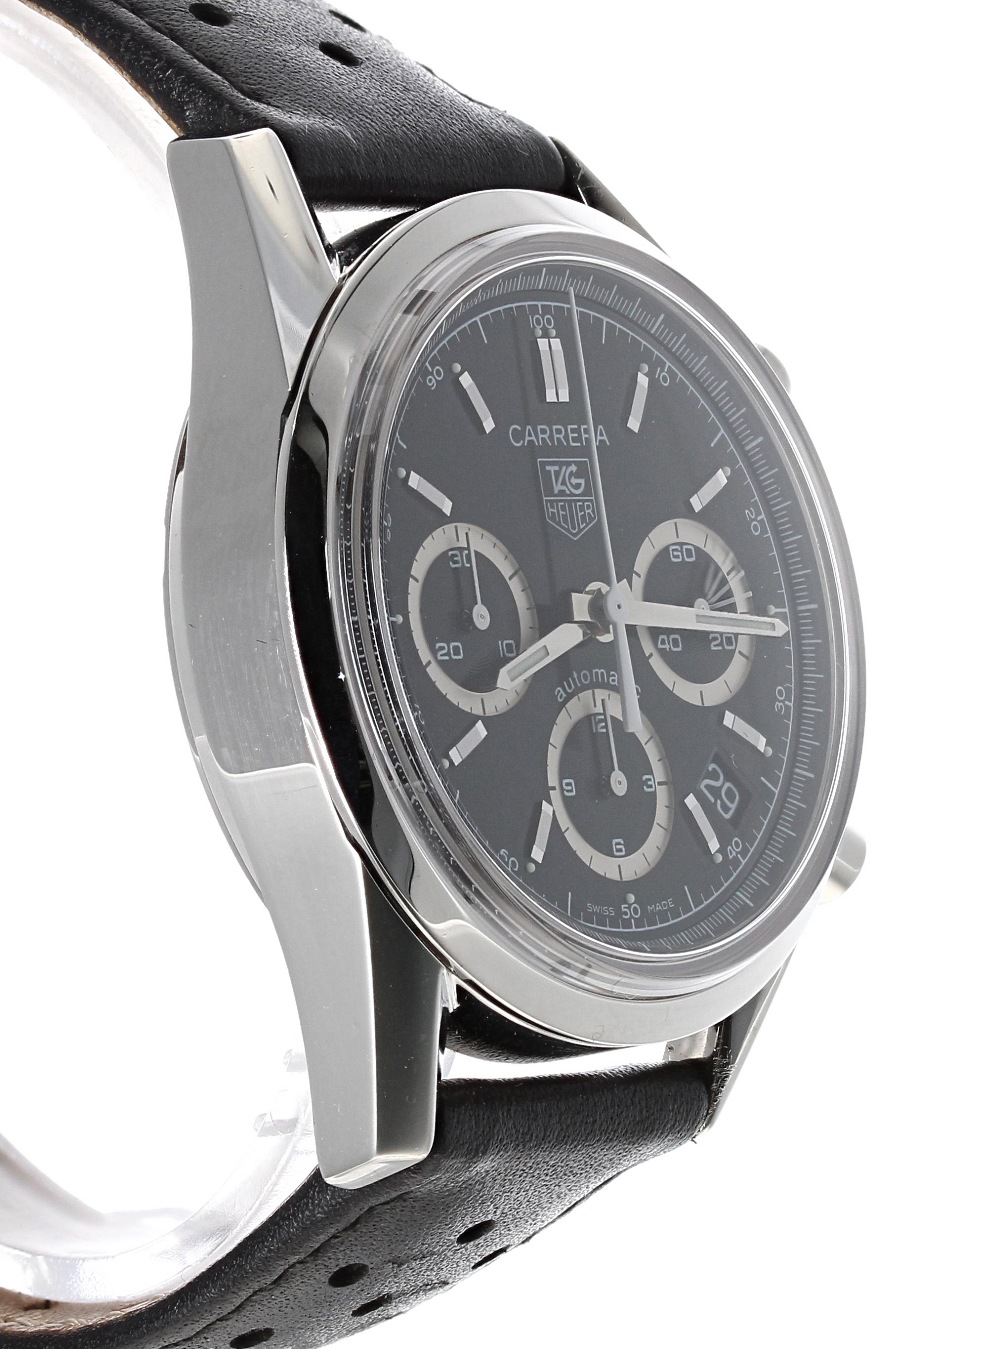 Tag Heuer Carrera re-edition automatic chronograph stainless steel gentleman's wristwatch, ref. - Image 4 of 6